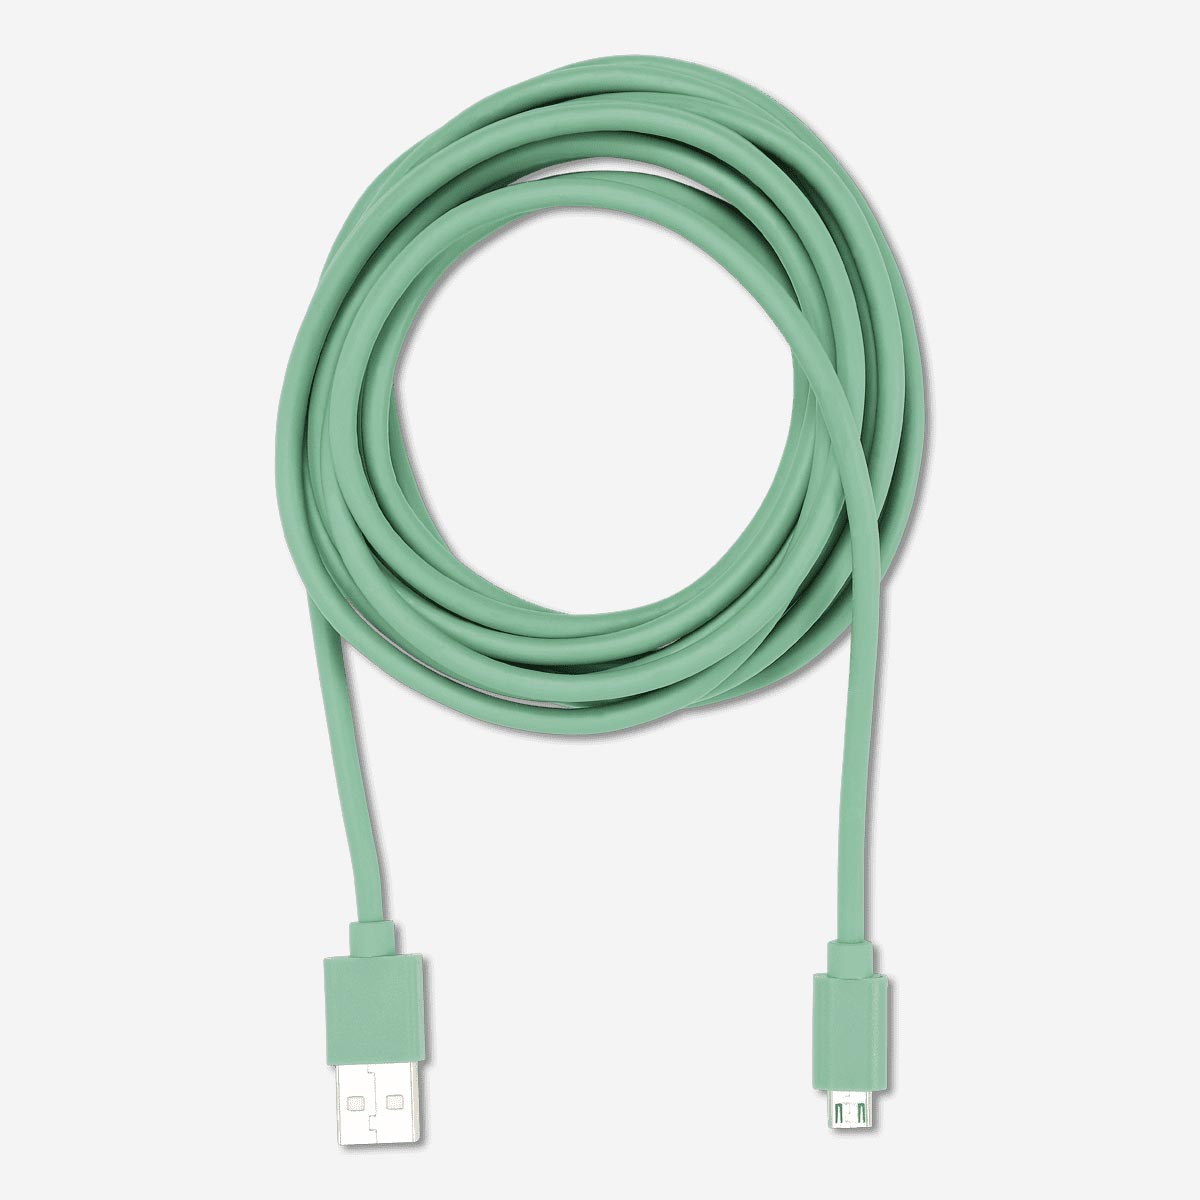 cable. For micro USB £0.50| Flying Tiger Copenhagen